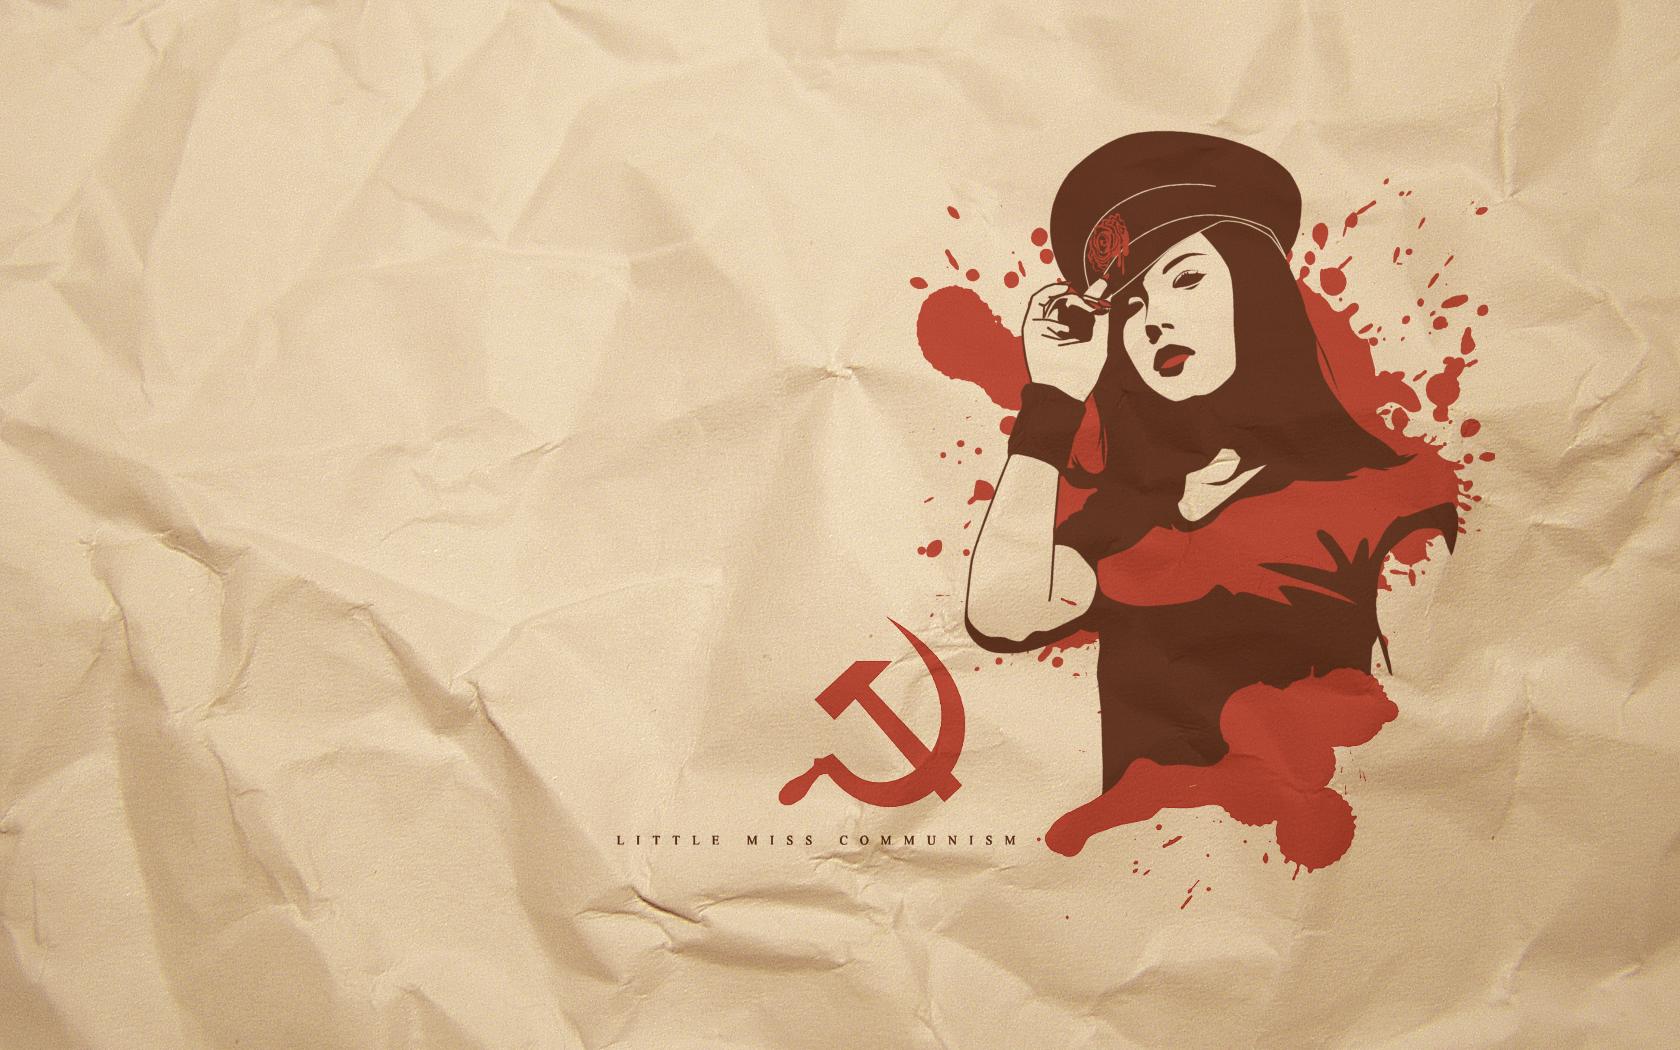 Communism - Hammer And Sickle Blood , HD Wallpaper & Backgrounds